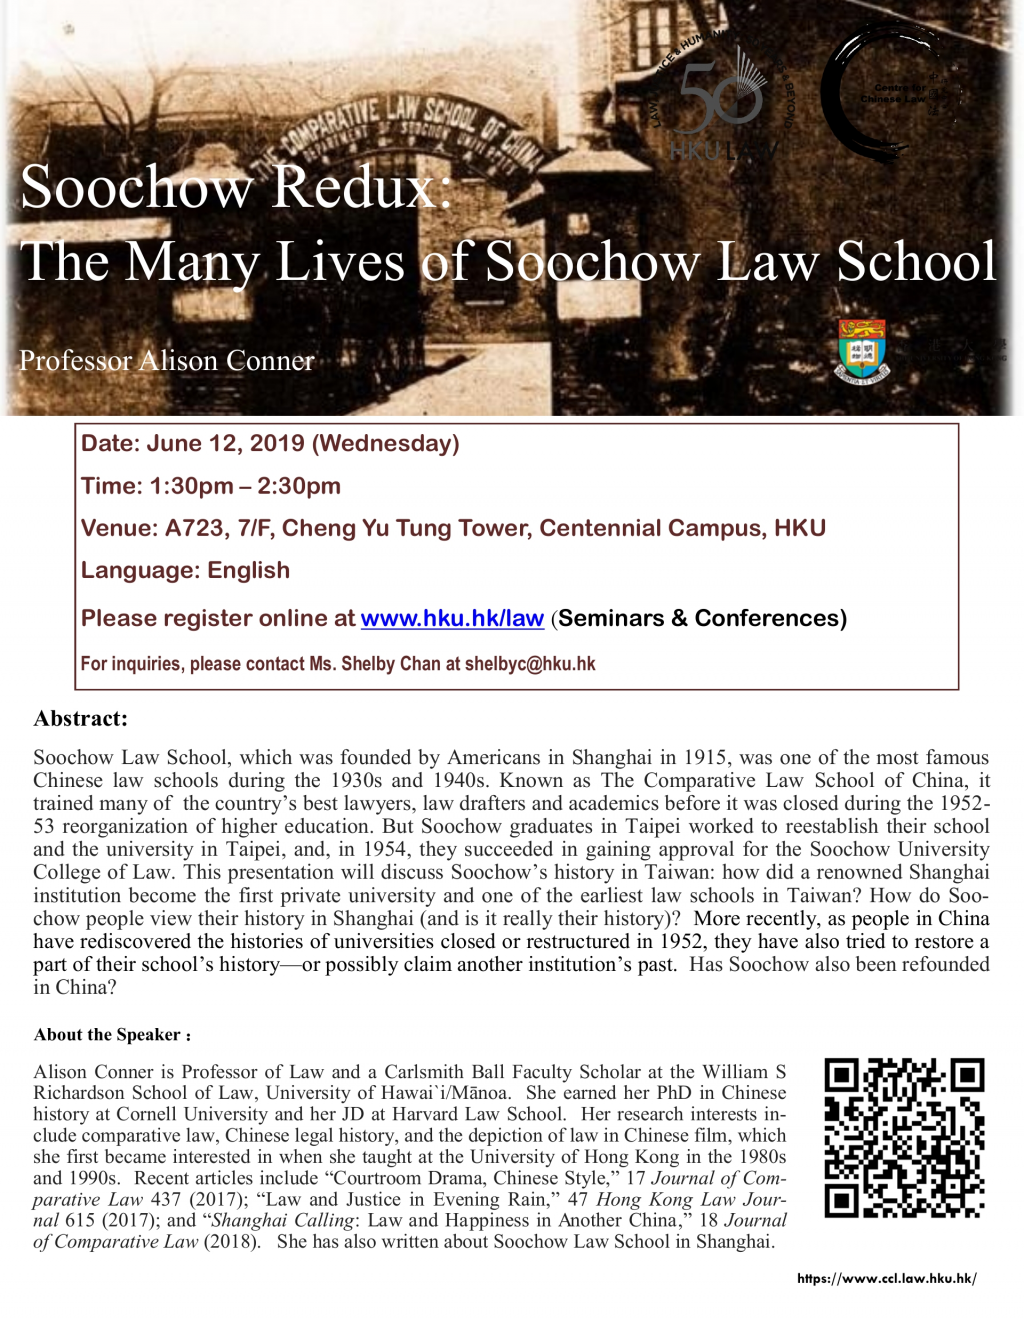 Soochow Redux: The Many Lives of Soochow Law School